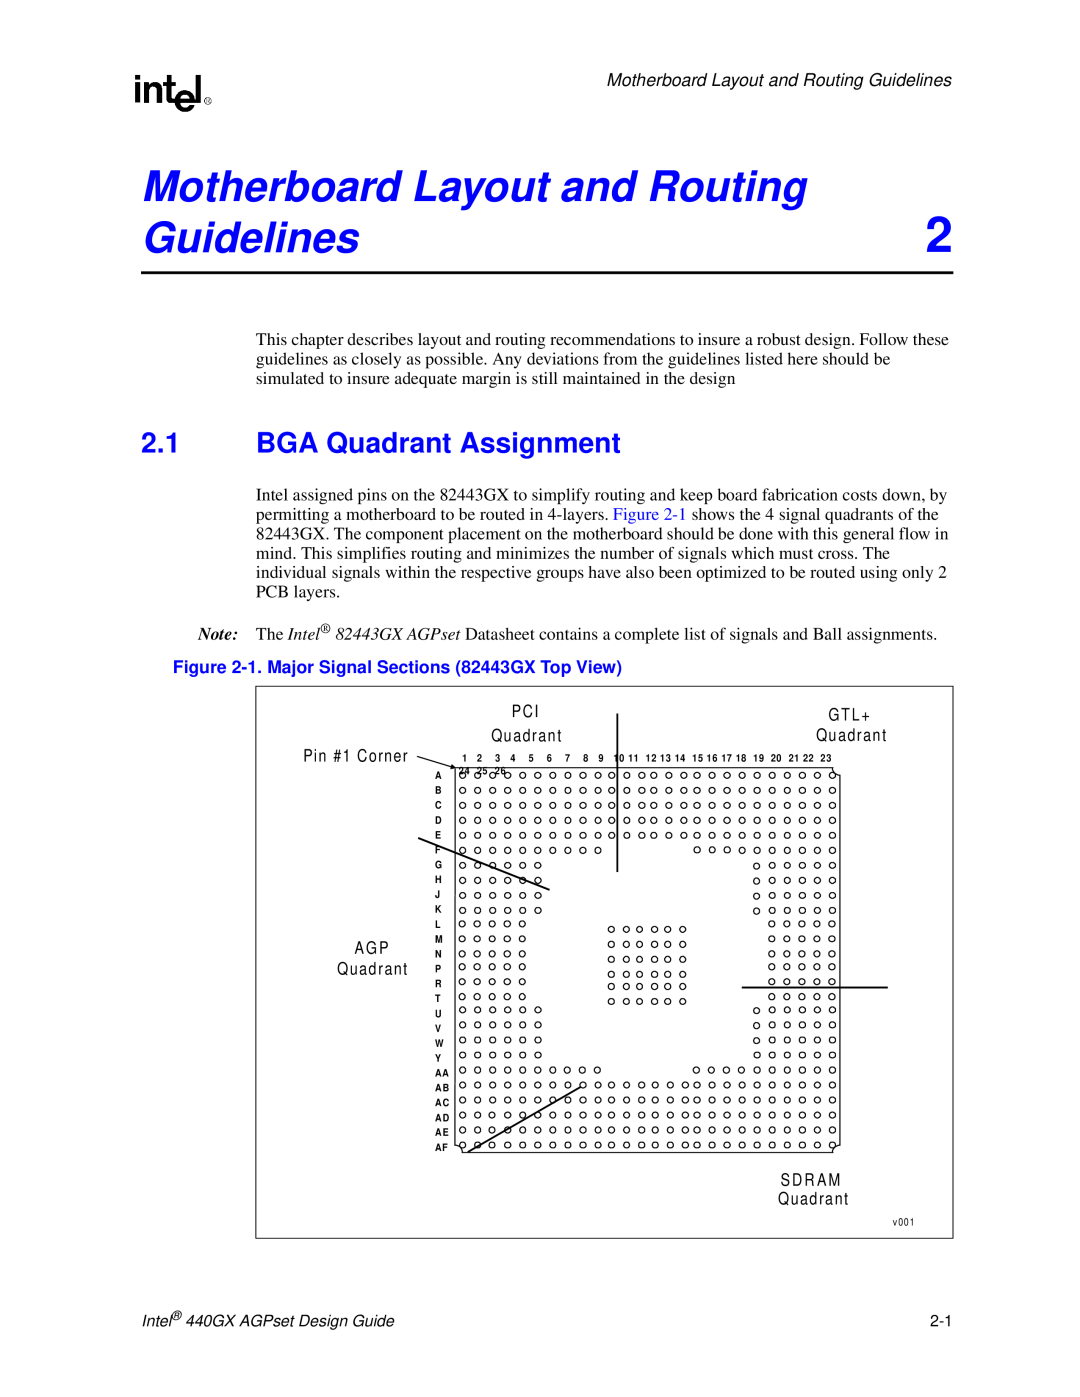 Intel 440GX manual BGA Quadrant Assignment, Motherboard Layout and Routing Guidelines, Pin #1 Corner, Sdram 